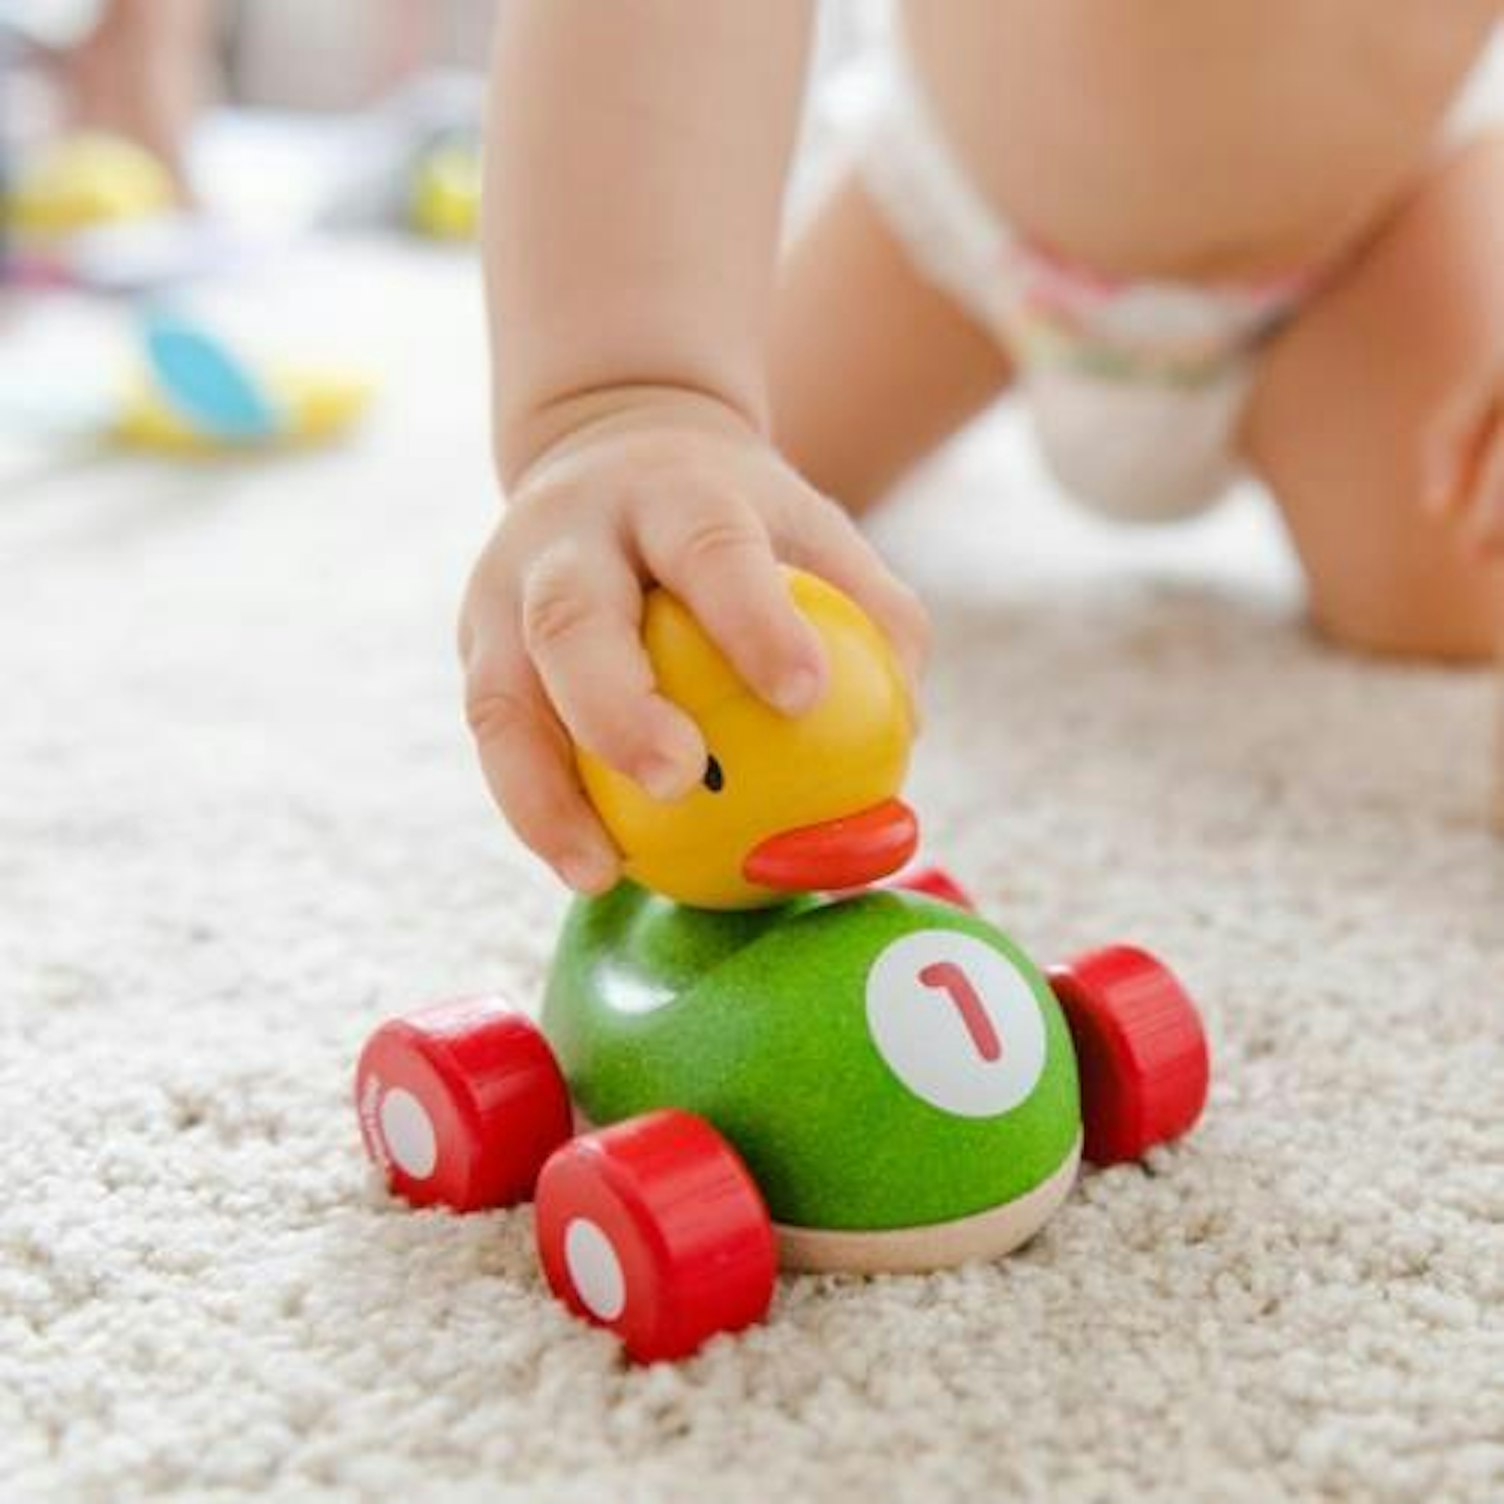 orig baby playing with wooden car Pexels1776137